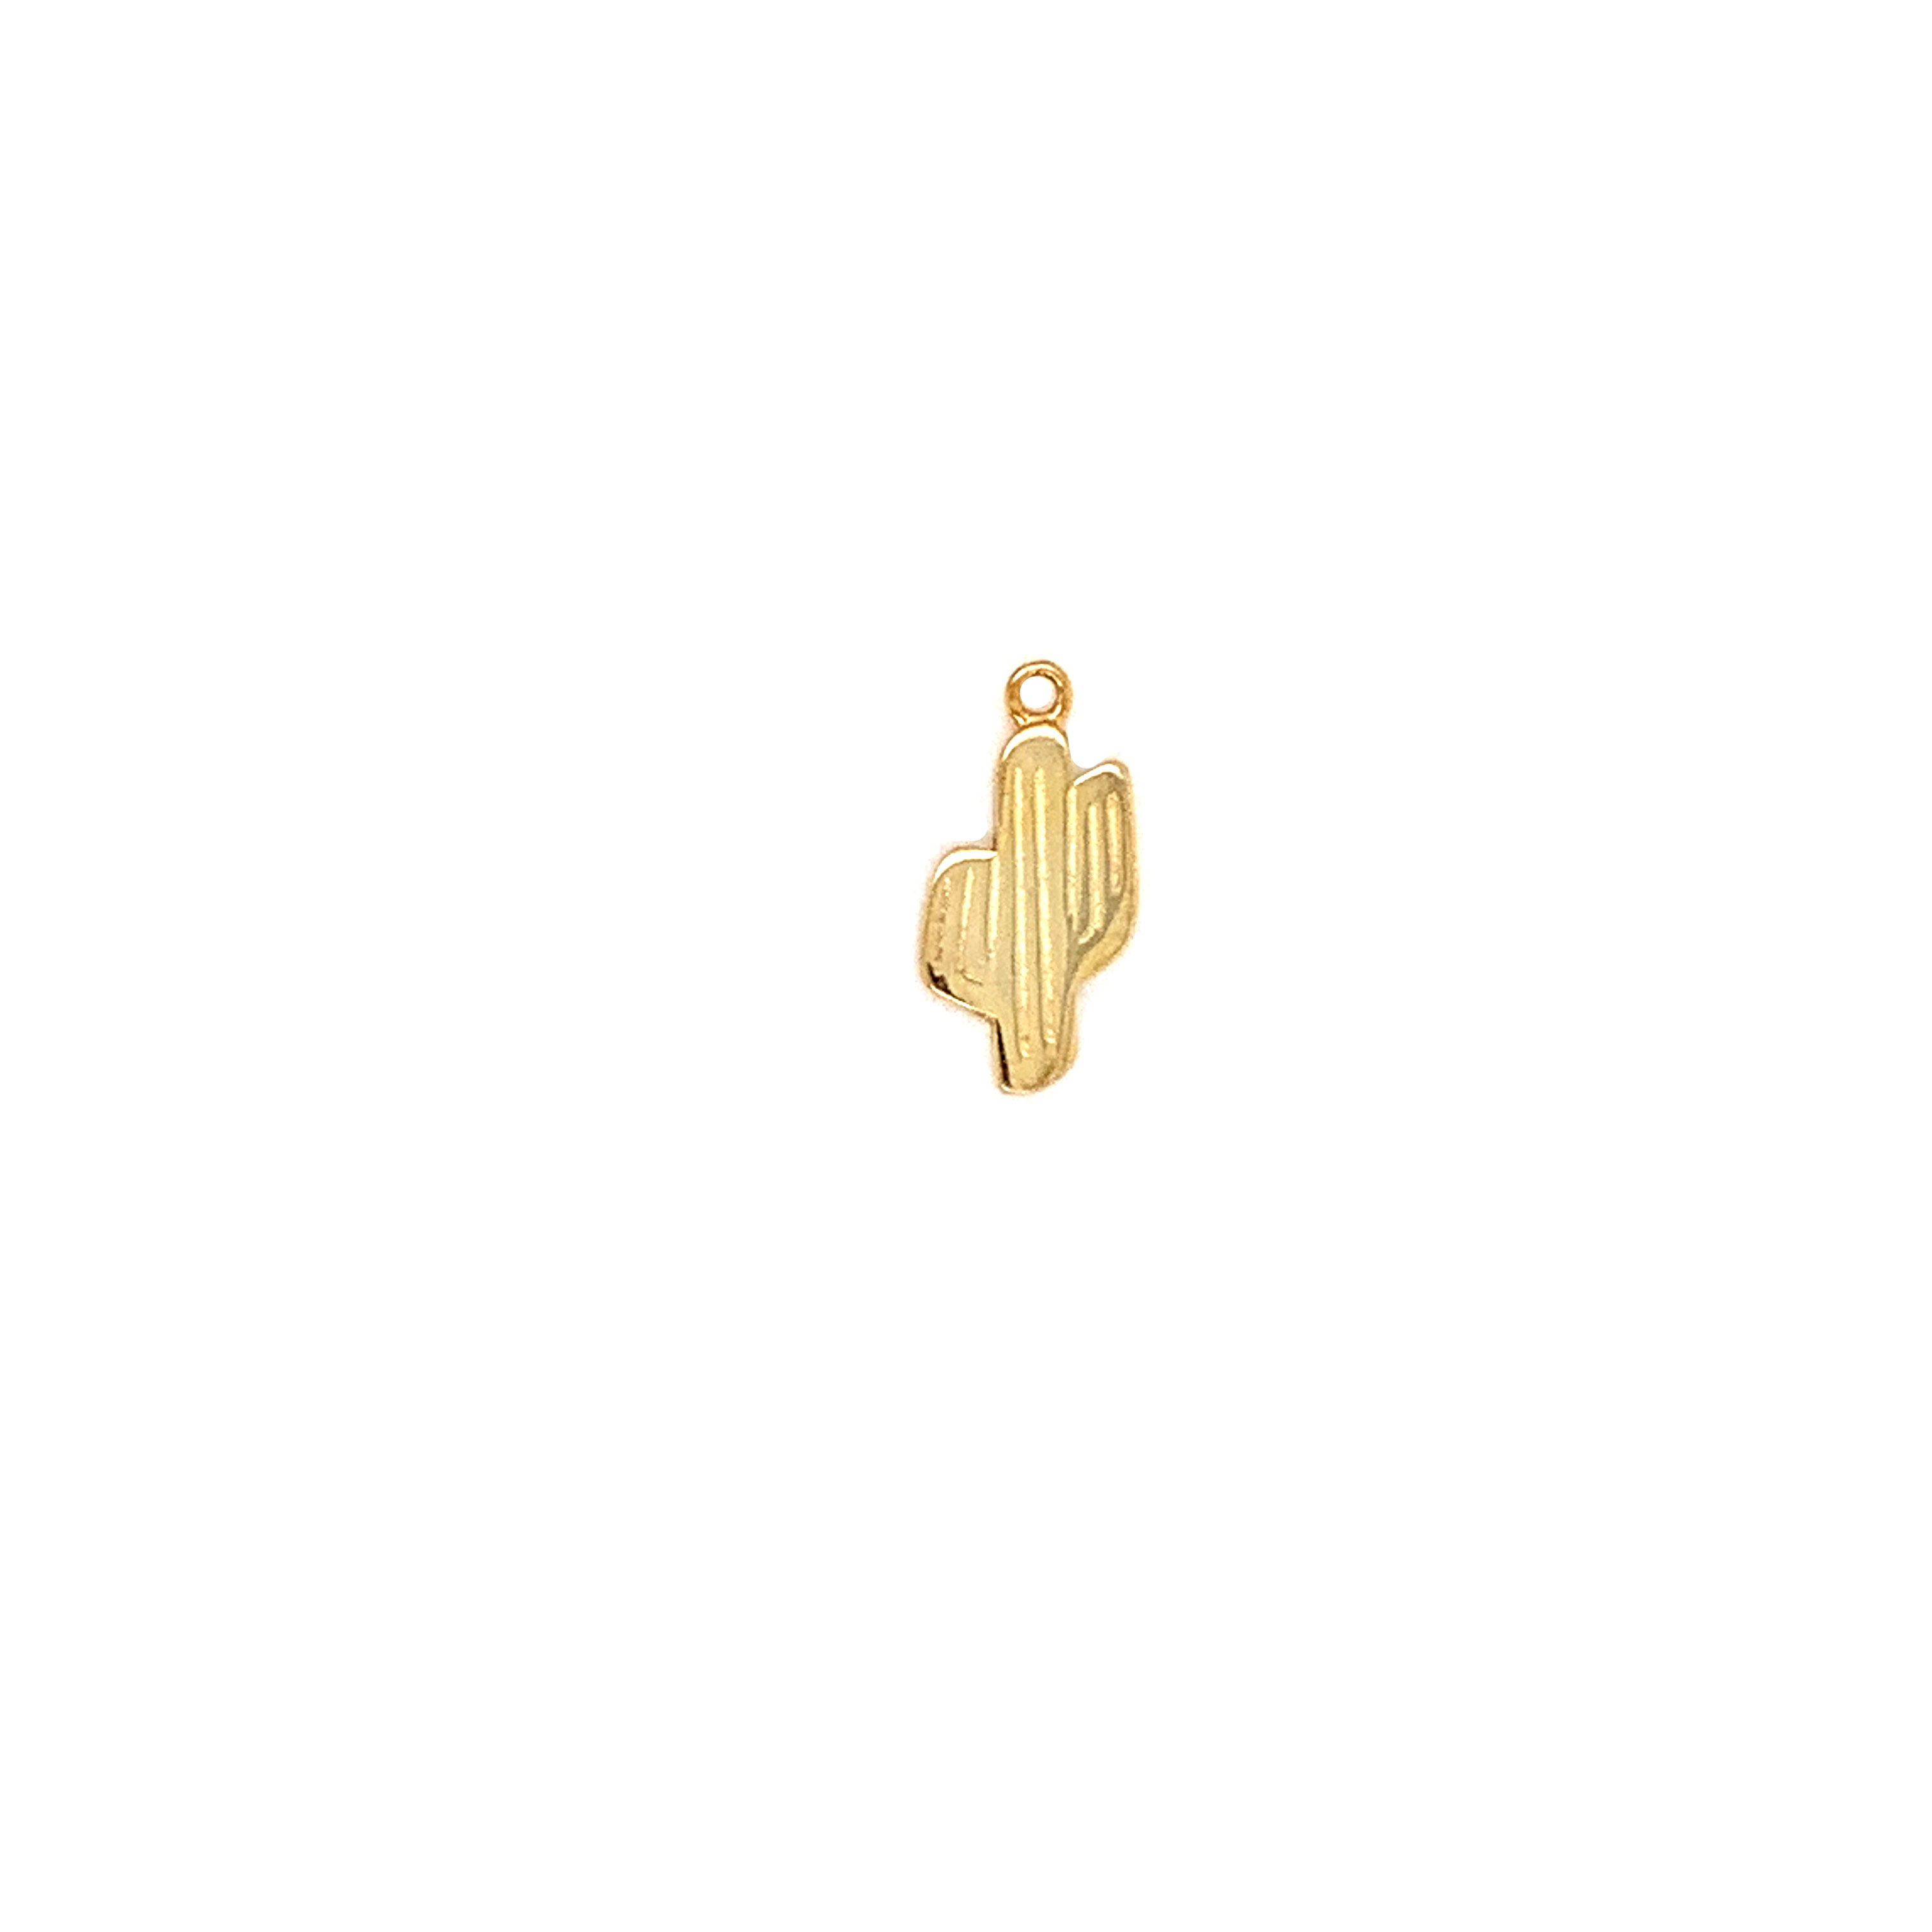 Cactus Charm - Rose Gold Plated